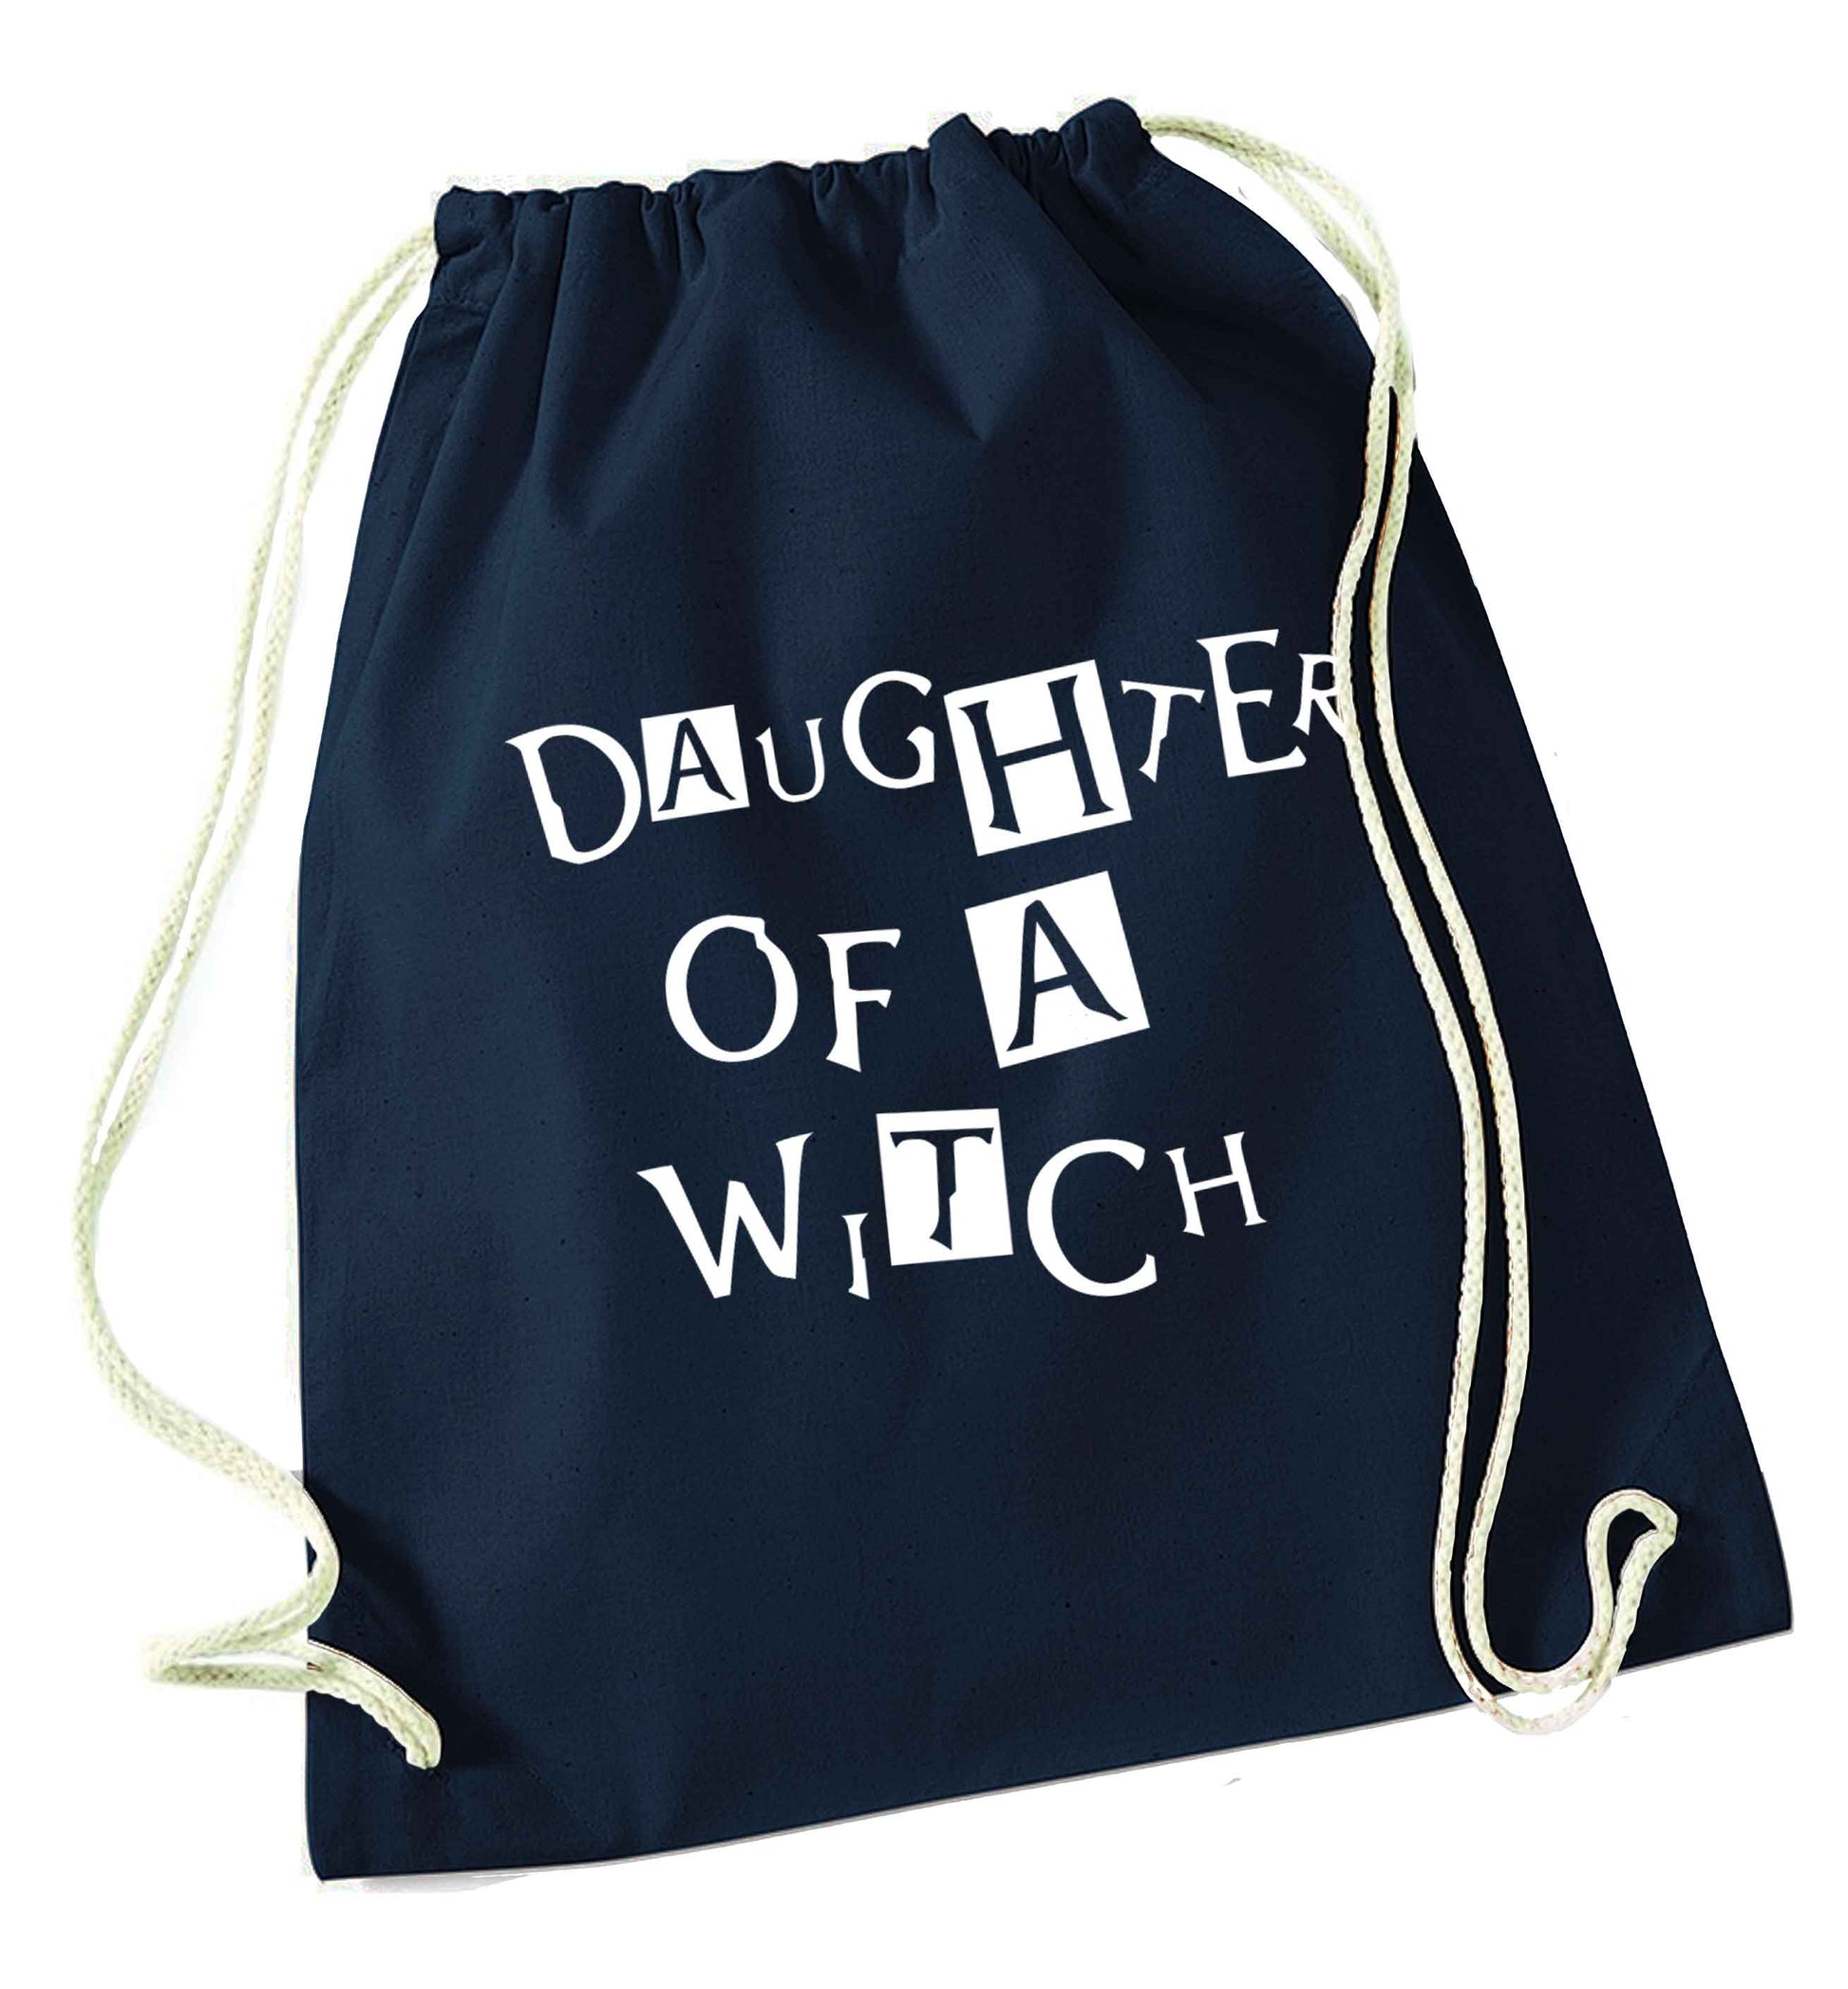 Daughter of a witch navy drawstring bag